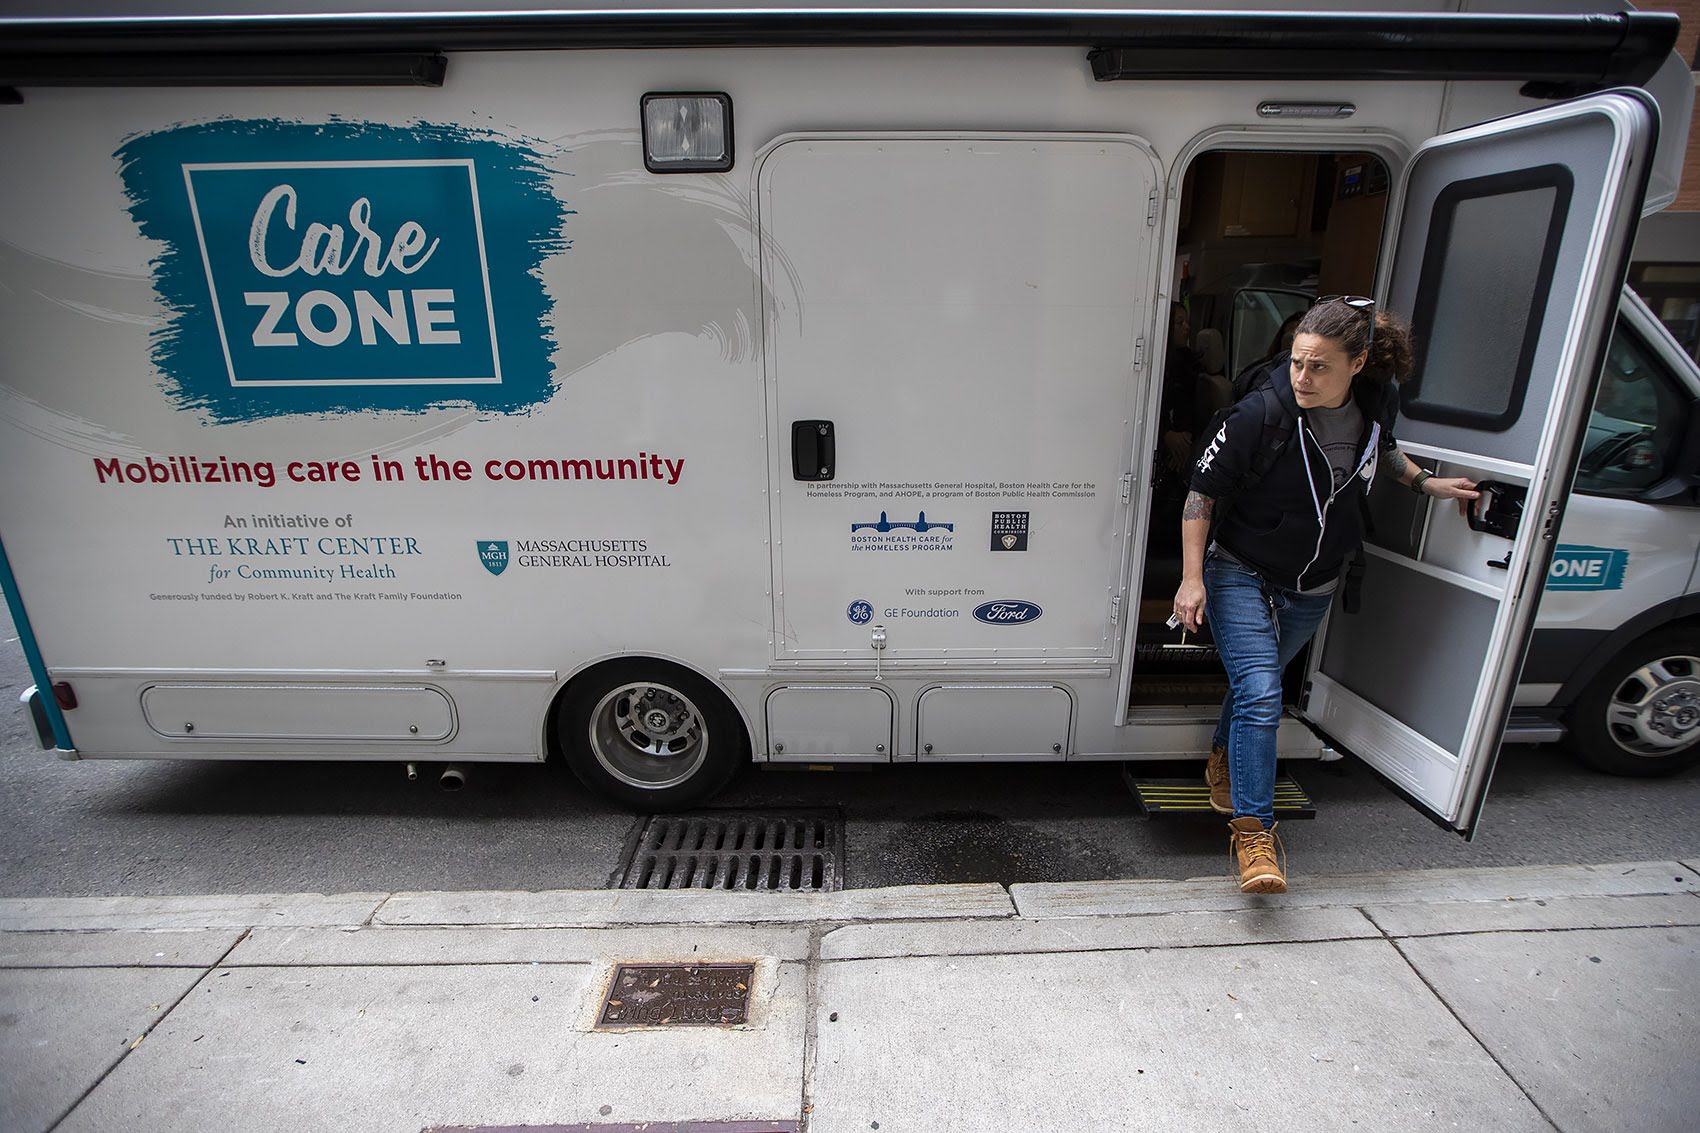 Sarah Mackin exits the Care Zone van after it parks on Haverhill St. near by North Station. They will mobilize and walk around the area to look for opioid users who need assistance. Photo by Jesse Costa for WBUR